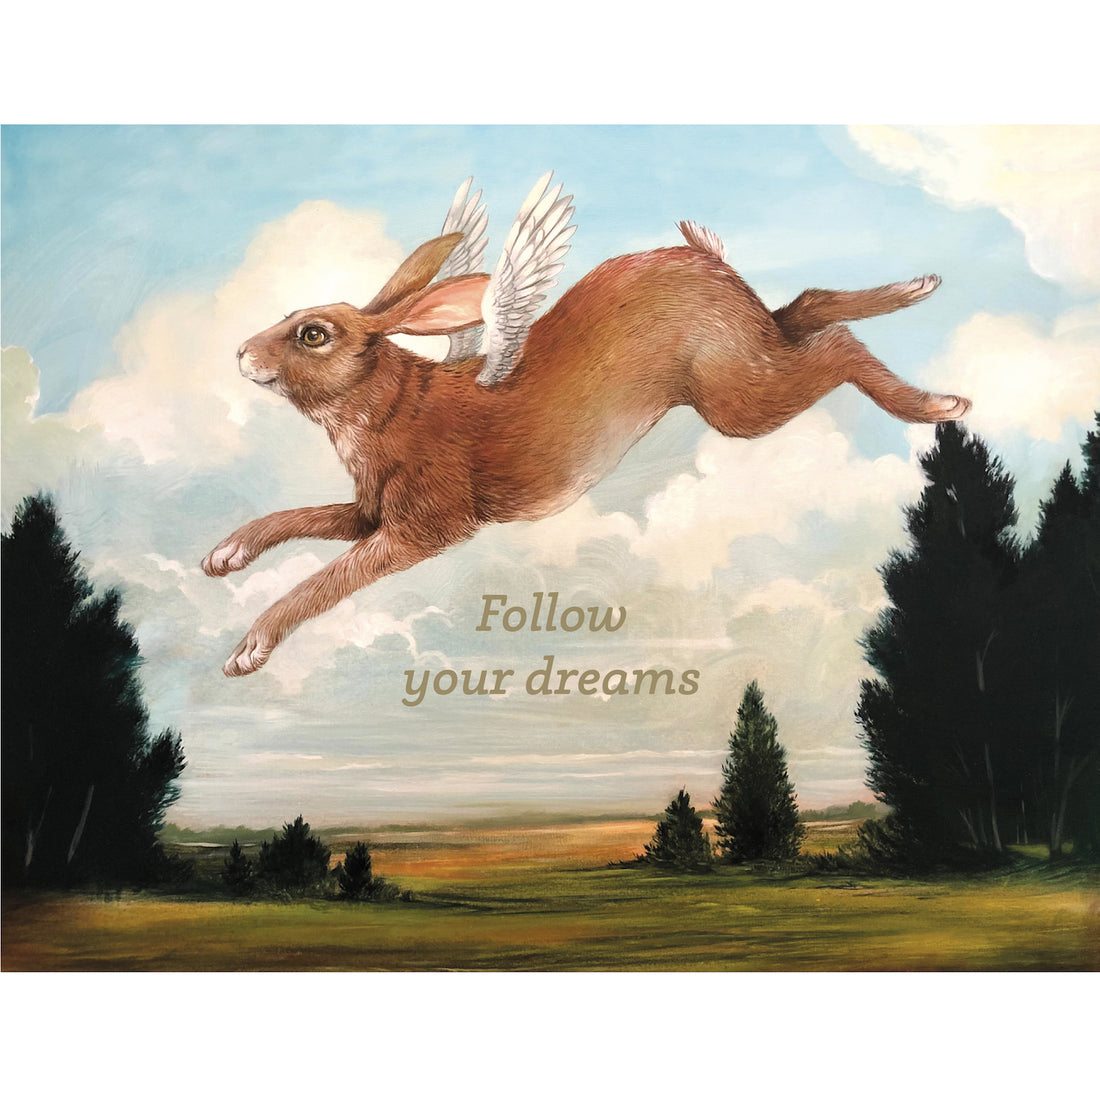 A whimsical illustration of a brown ribbon with small white wings flying through a cloudy blue sky over a green landscape, with &quot;Follow your dreams&quot; printed in gold below the rabbit.